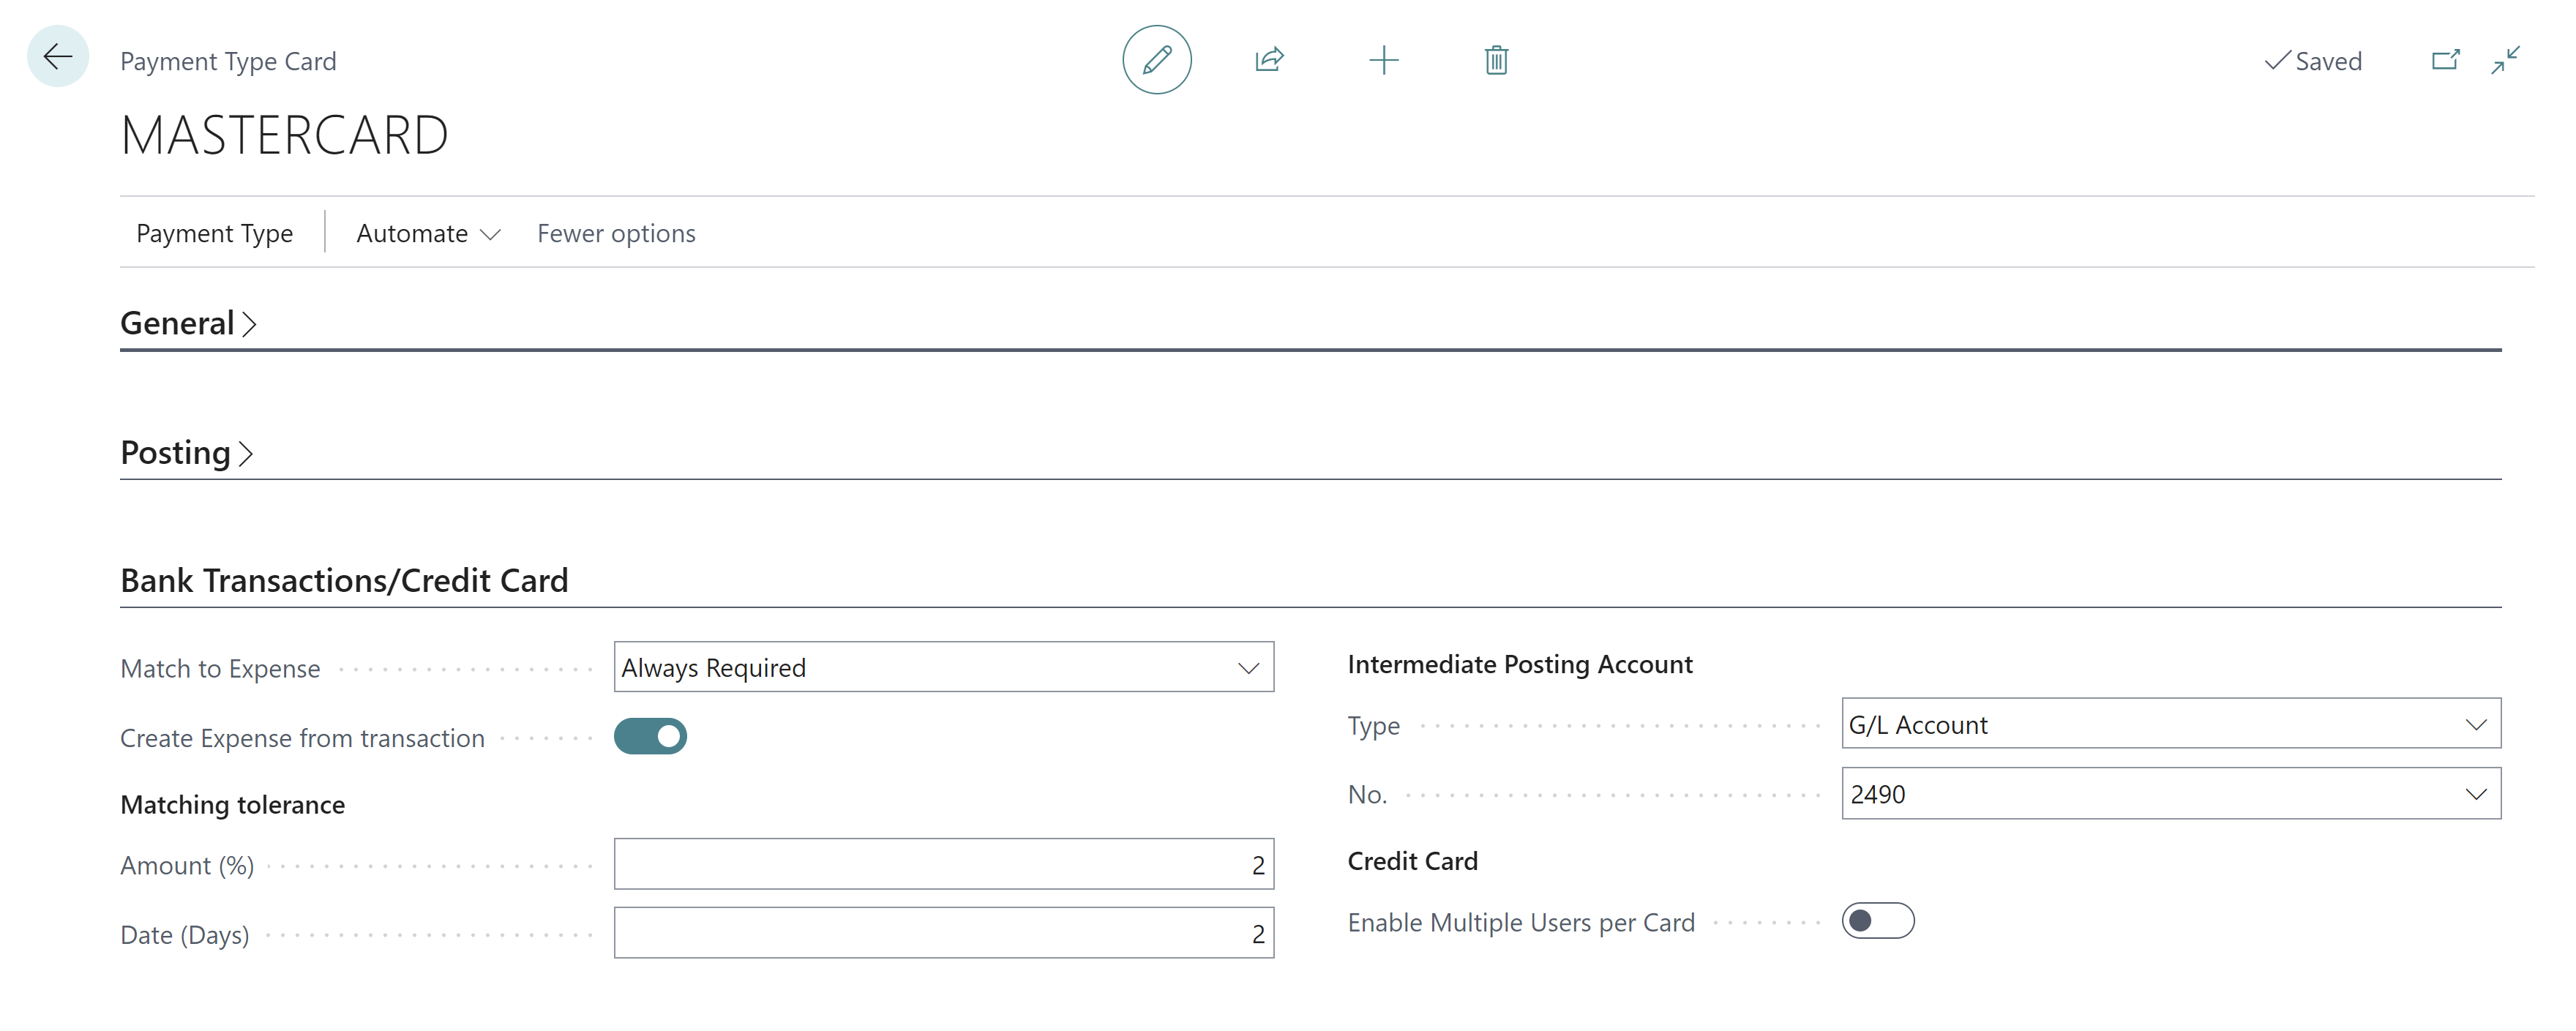 Payment Type Card_Bank Transactions Credit Card FastTab fields